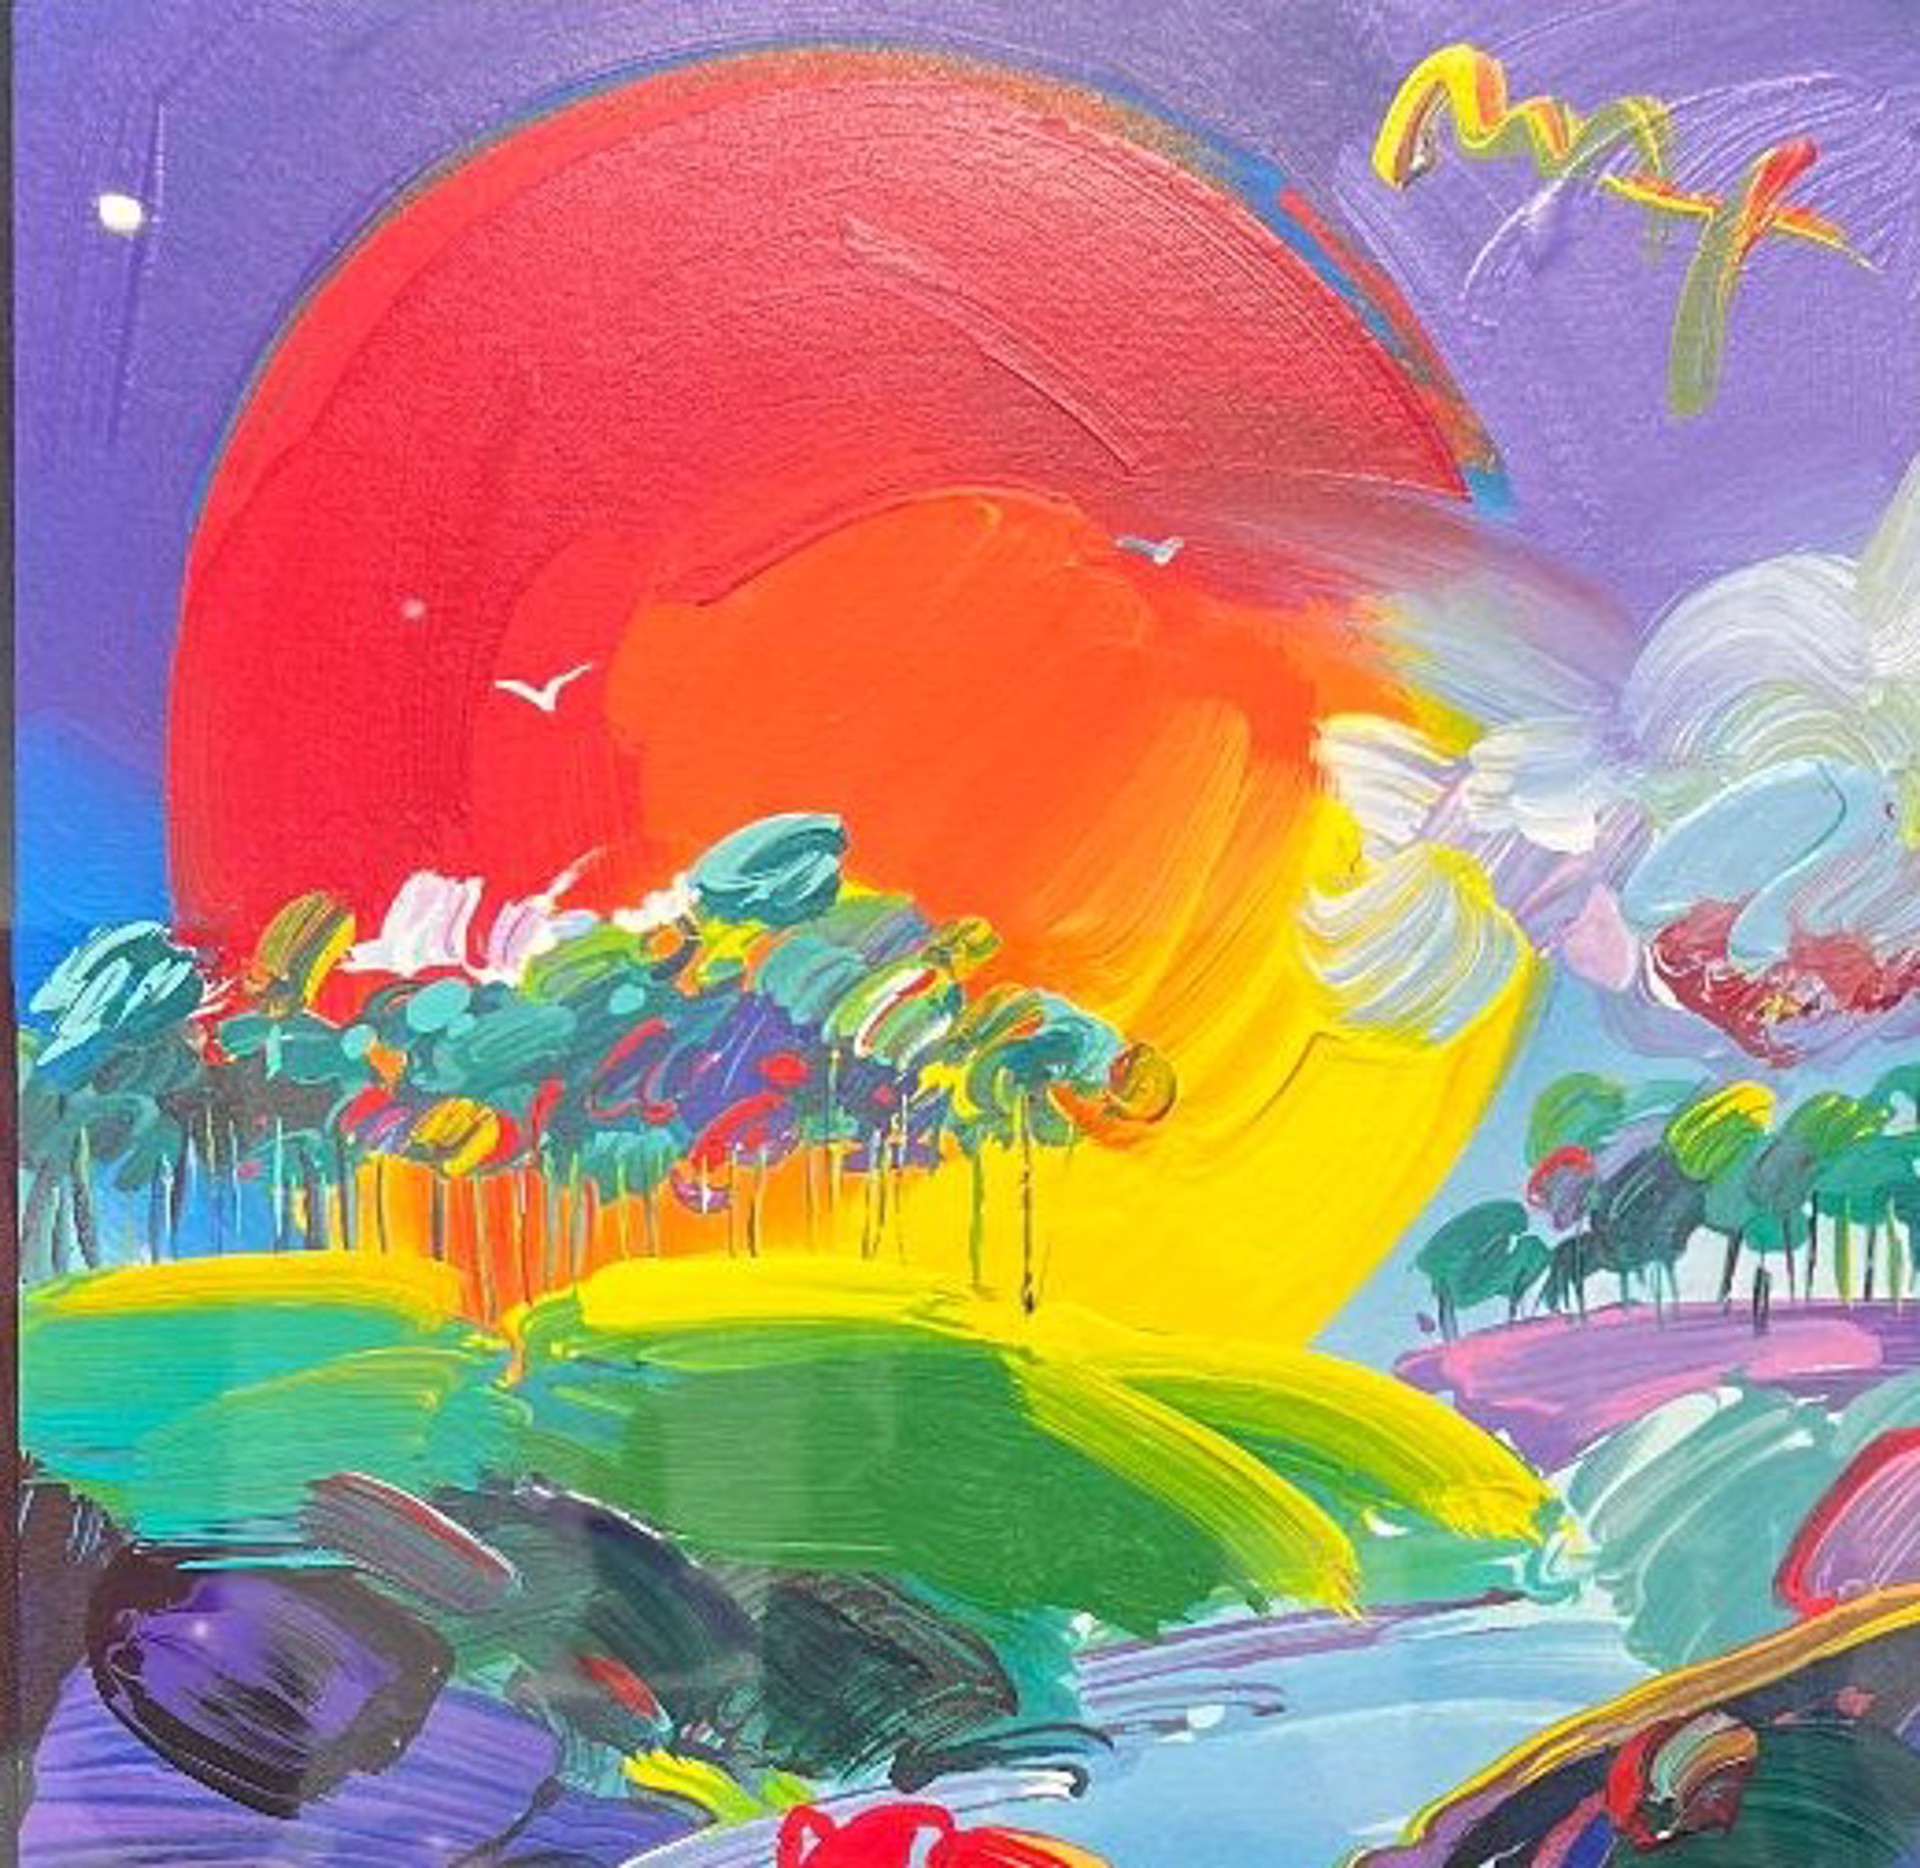 Retro:  Without Boarders by Peter Max